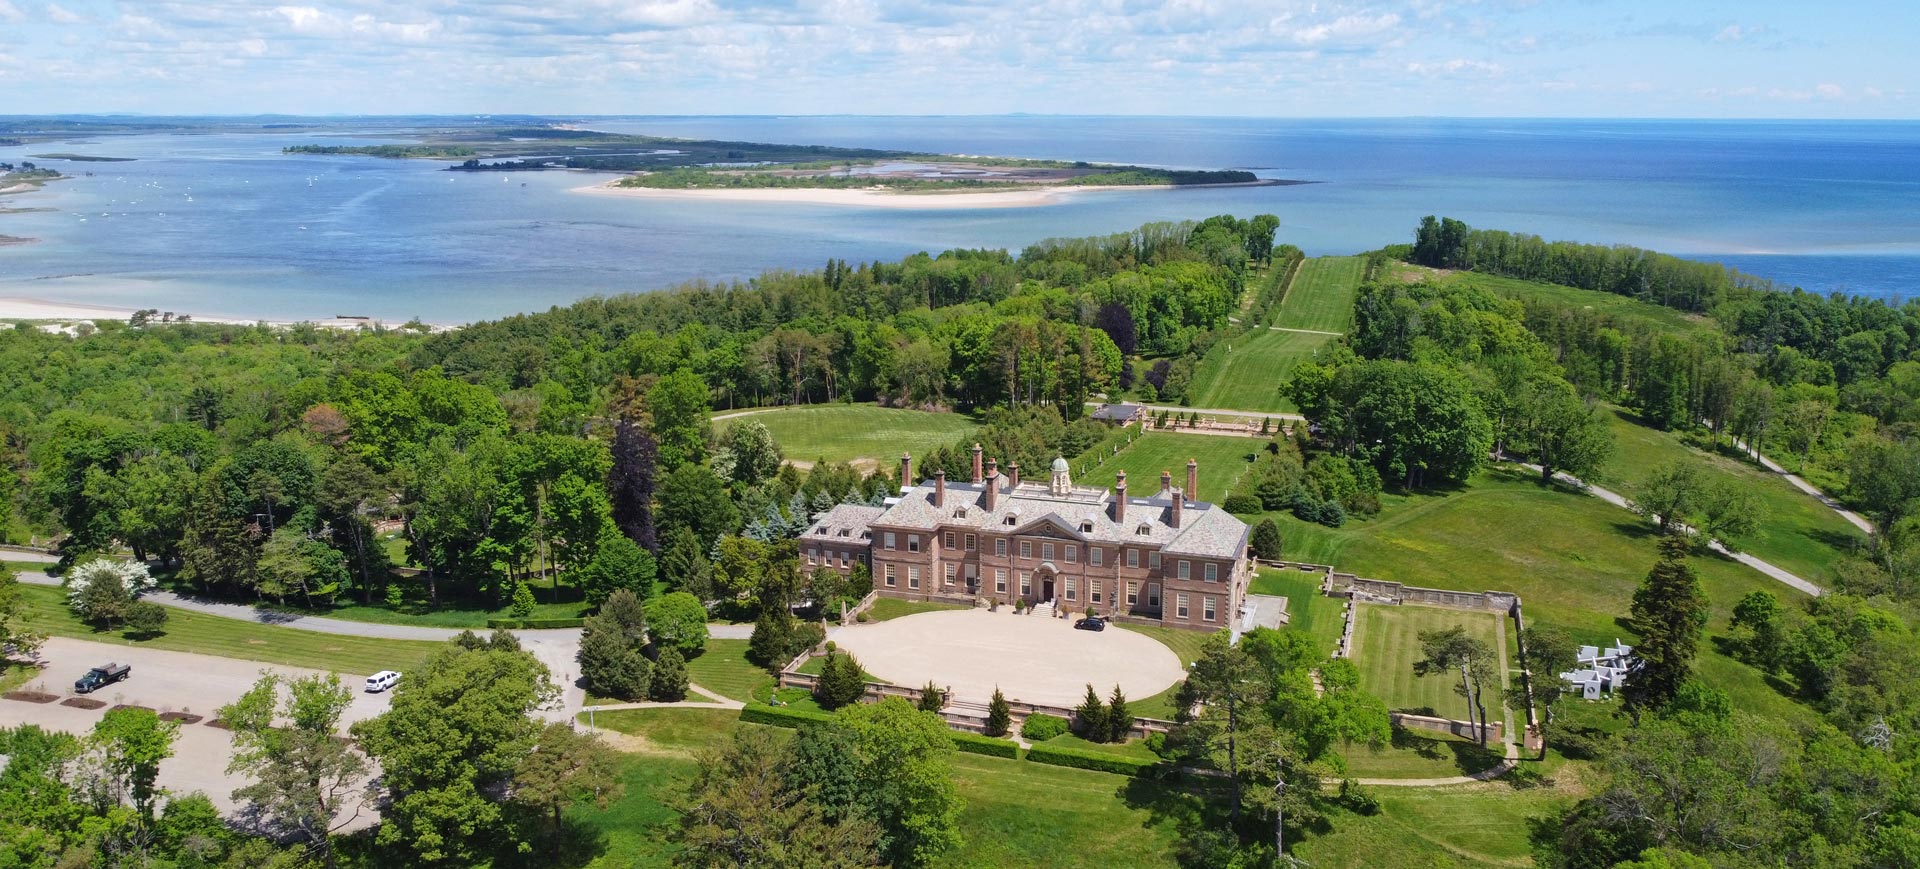 Crane Estate offers a variety of outdoor adventures in coastal Massachusetts.